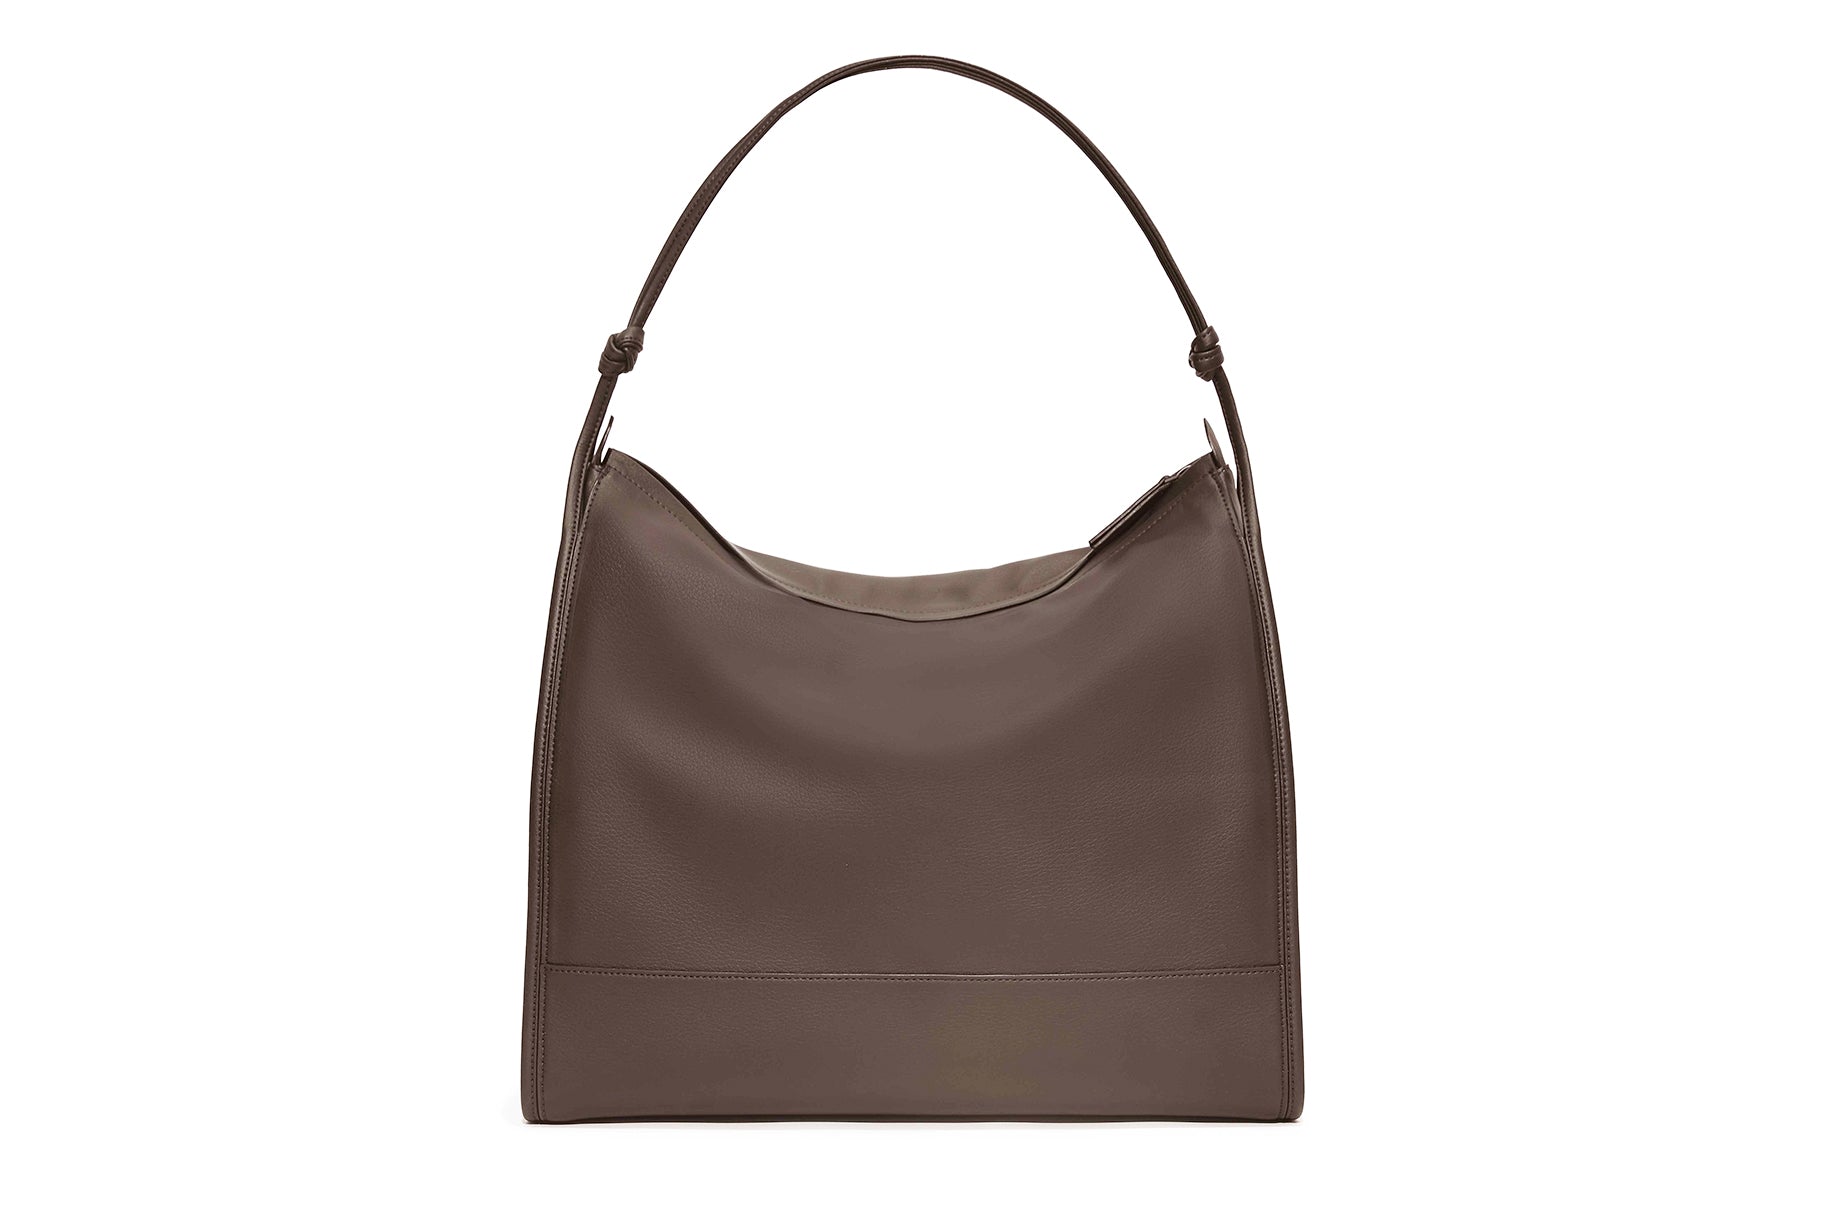 The Shoulder Bag in Banbū in Taupe image 3